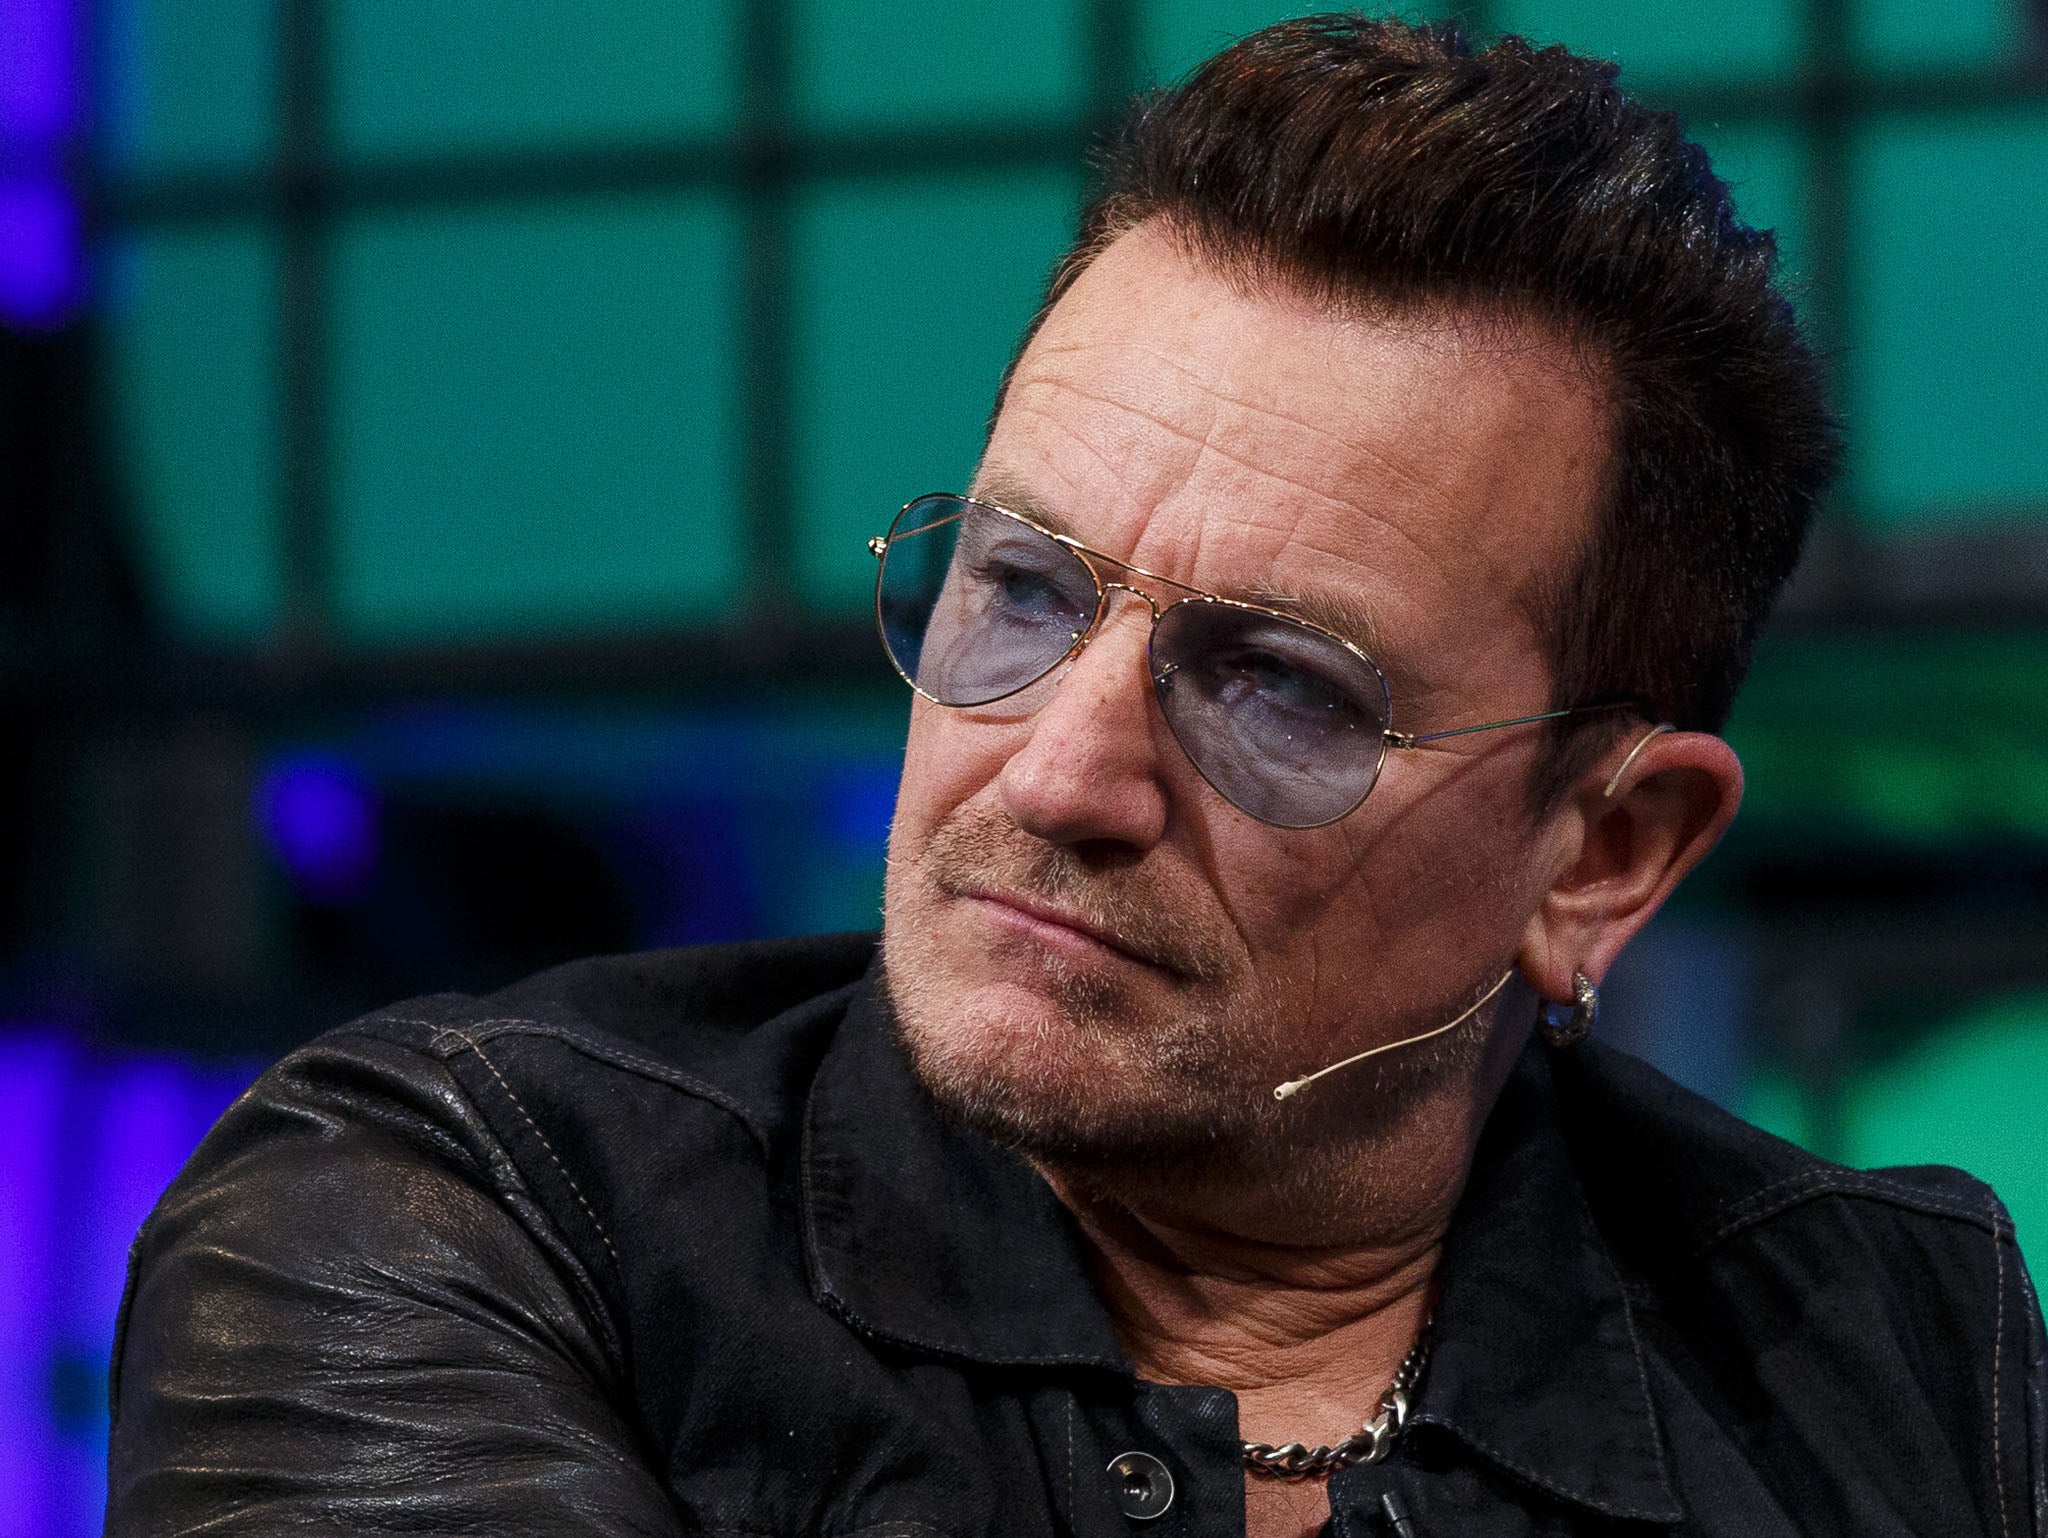 Bono Bicycle Accident U2 Singer Undergoes Five Hours Of